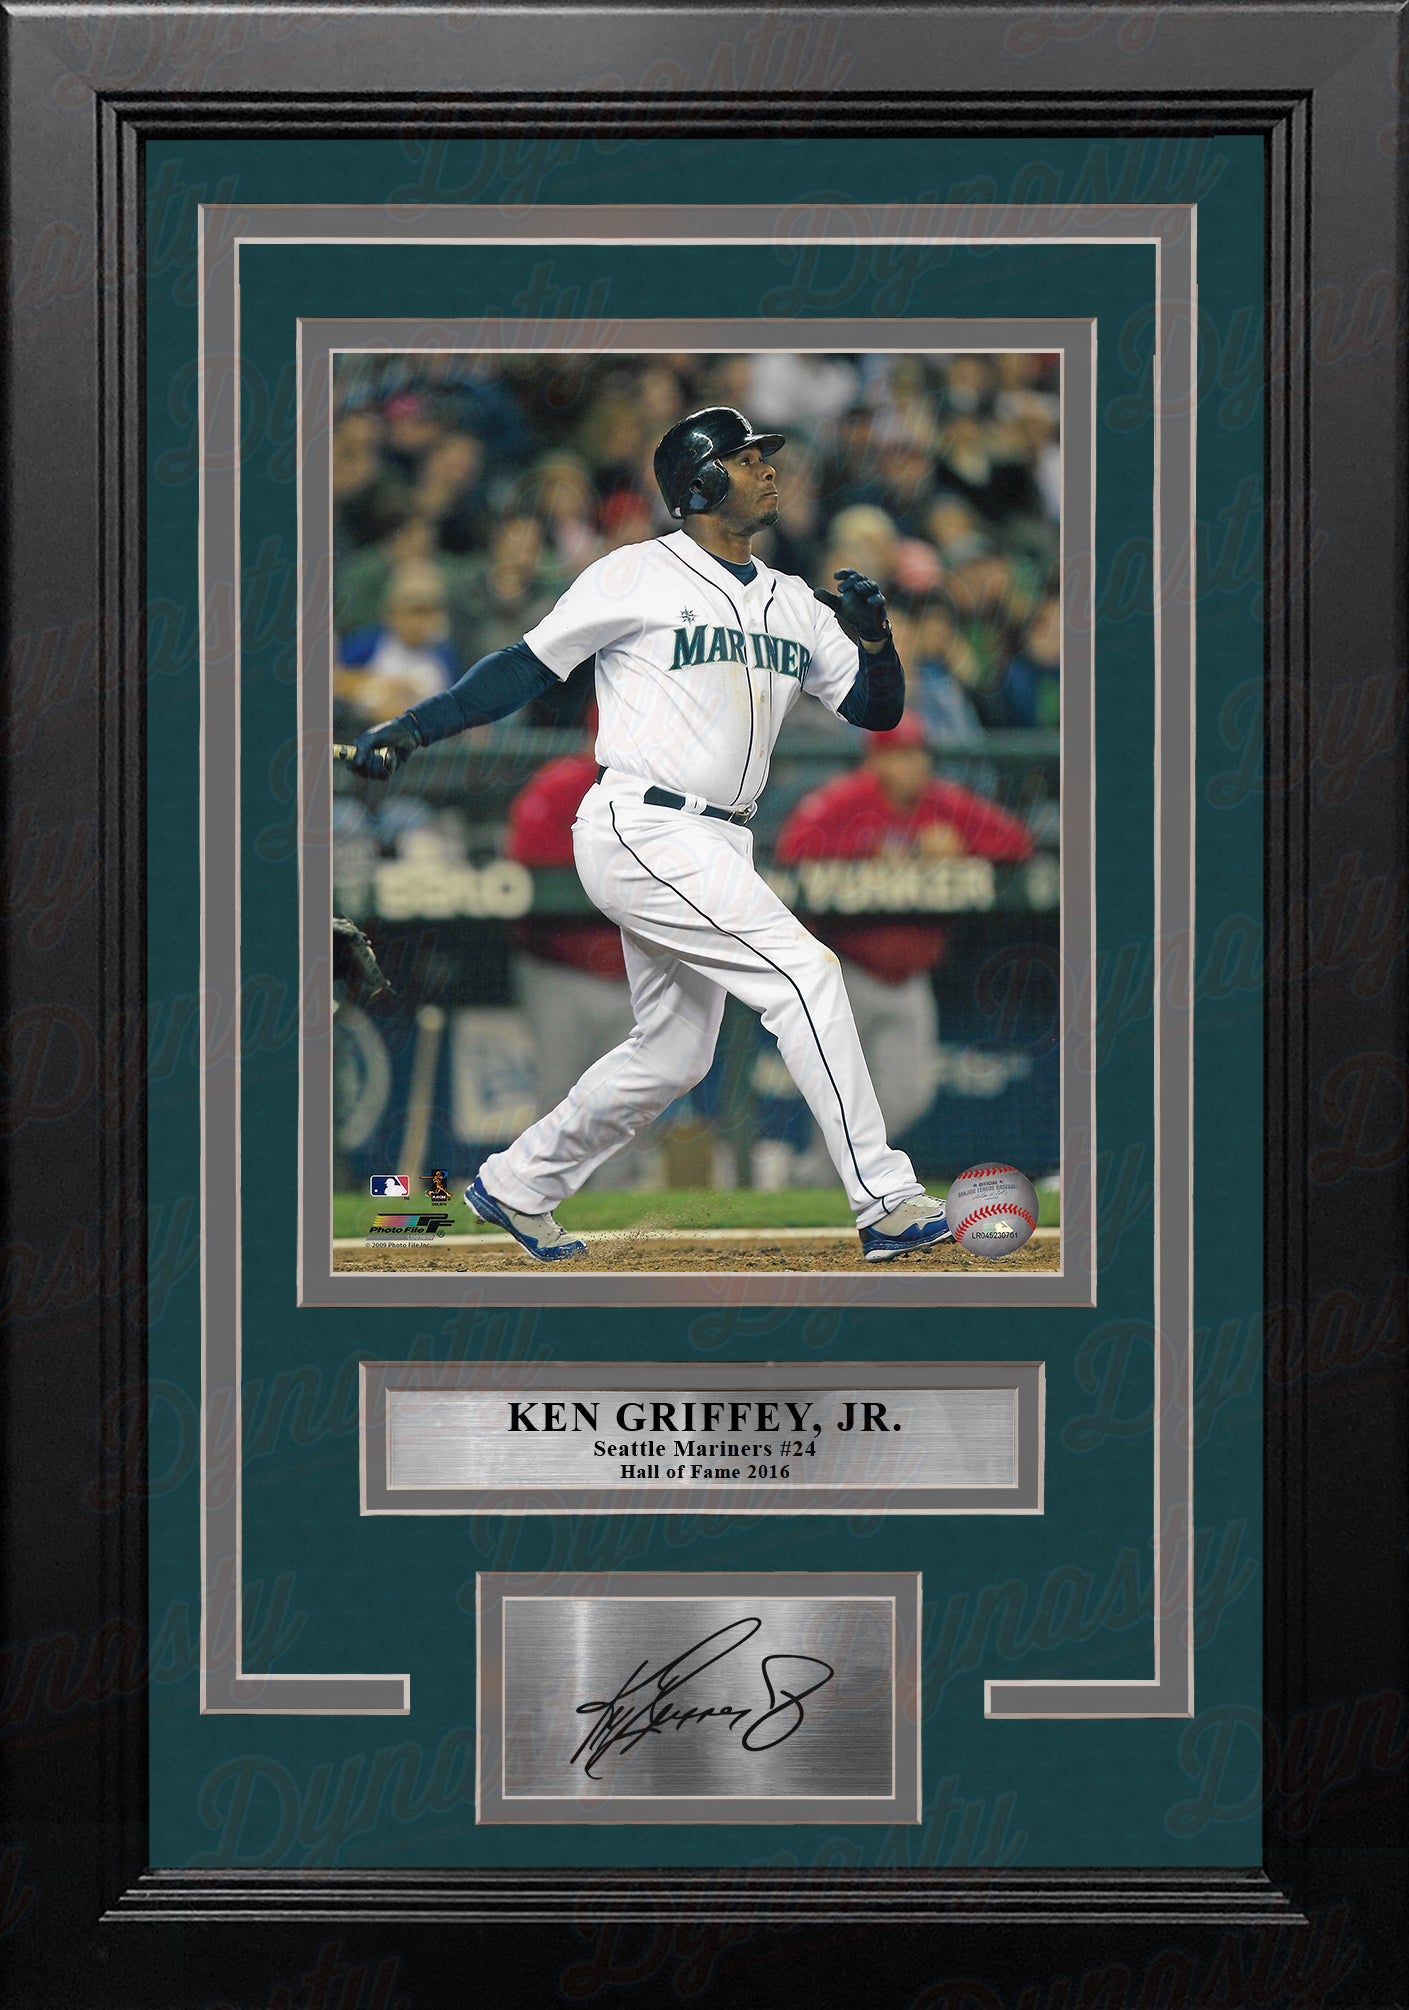 KEN GRIFFEY JR signed and framed Jersey with signature and HOF